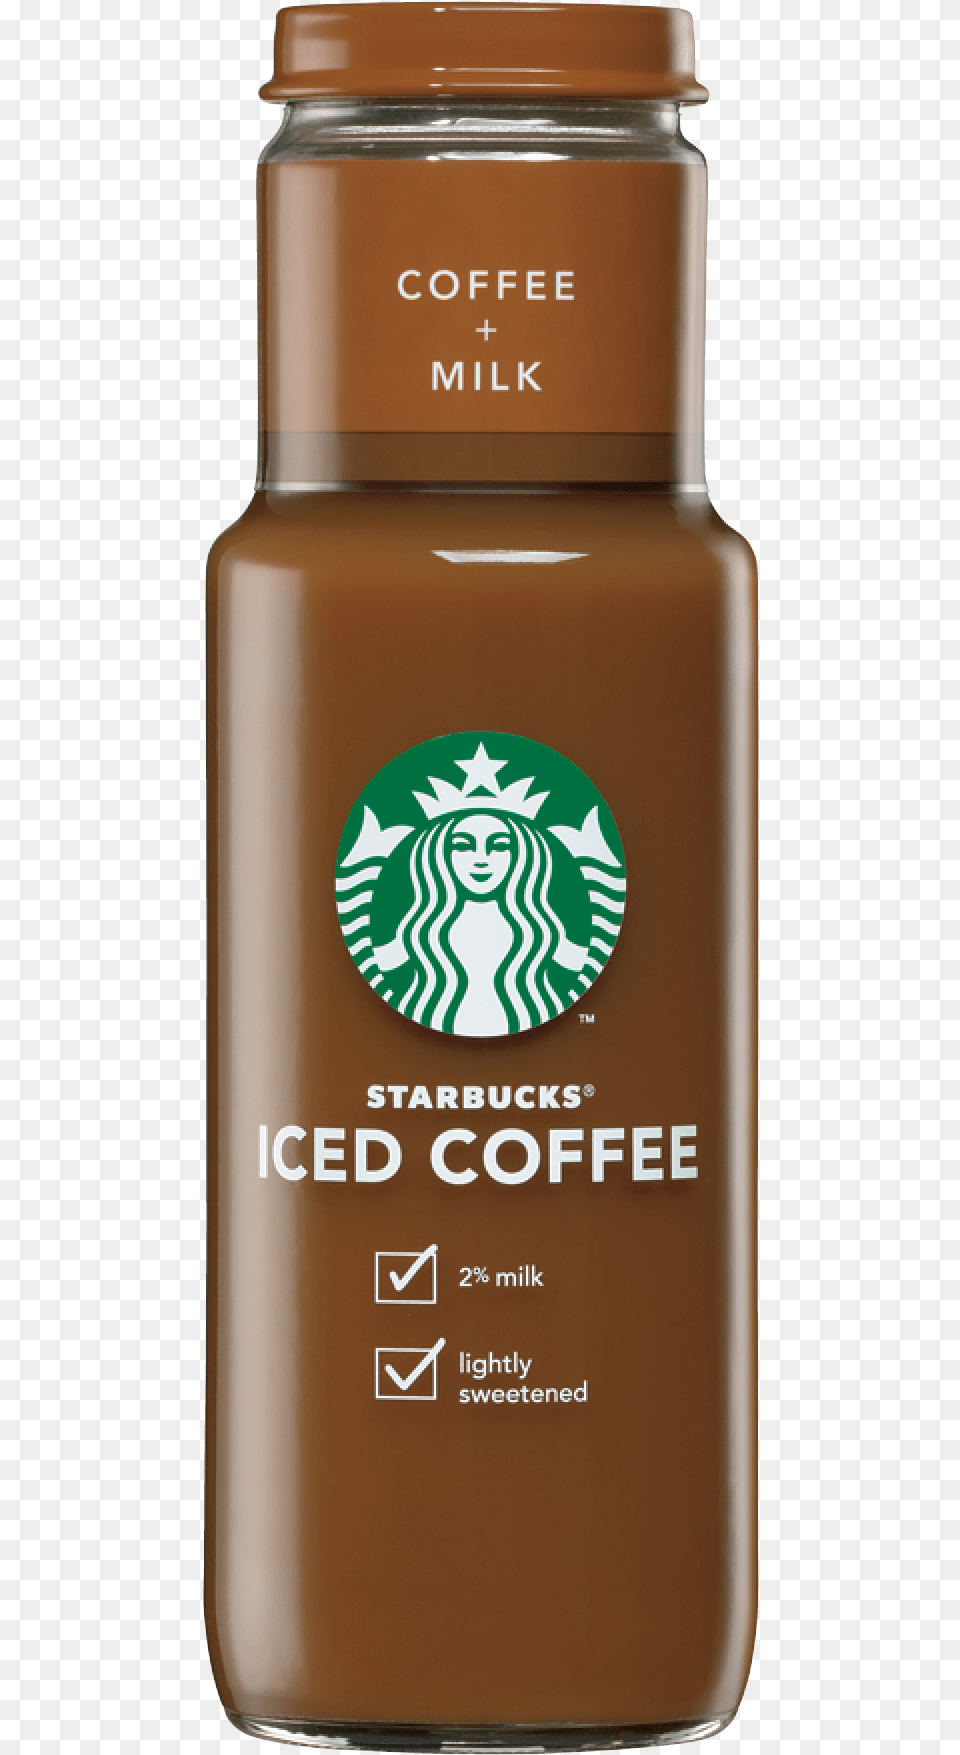 Starbucks New Logo 2011, Cup, Bottle, Shaker, Chocolate Free Png